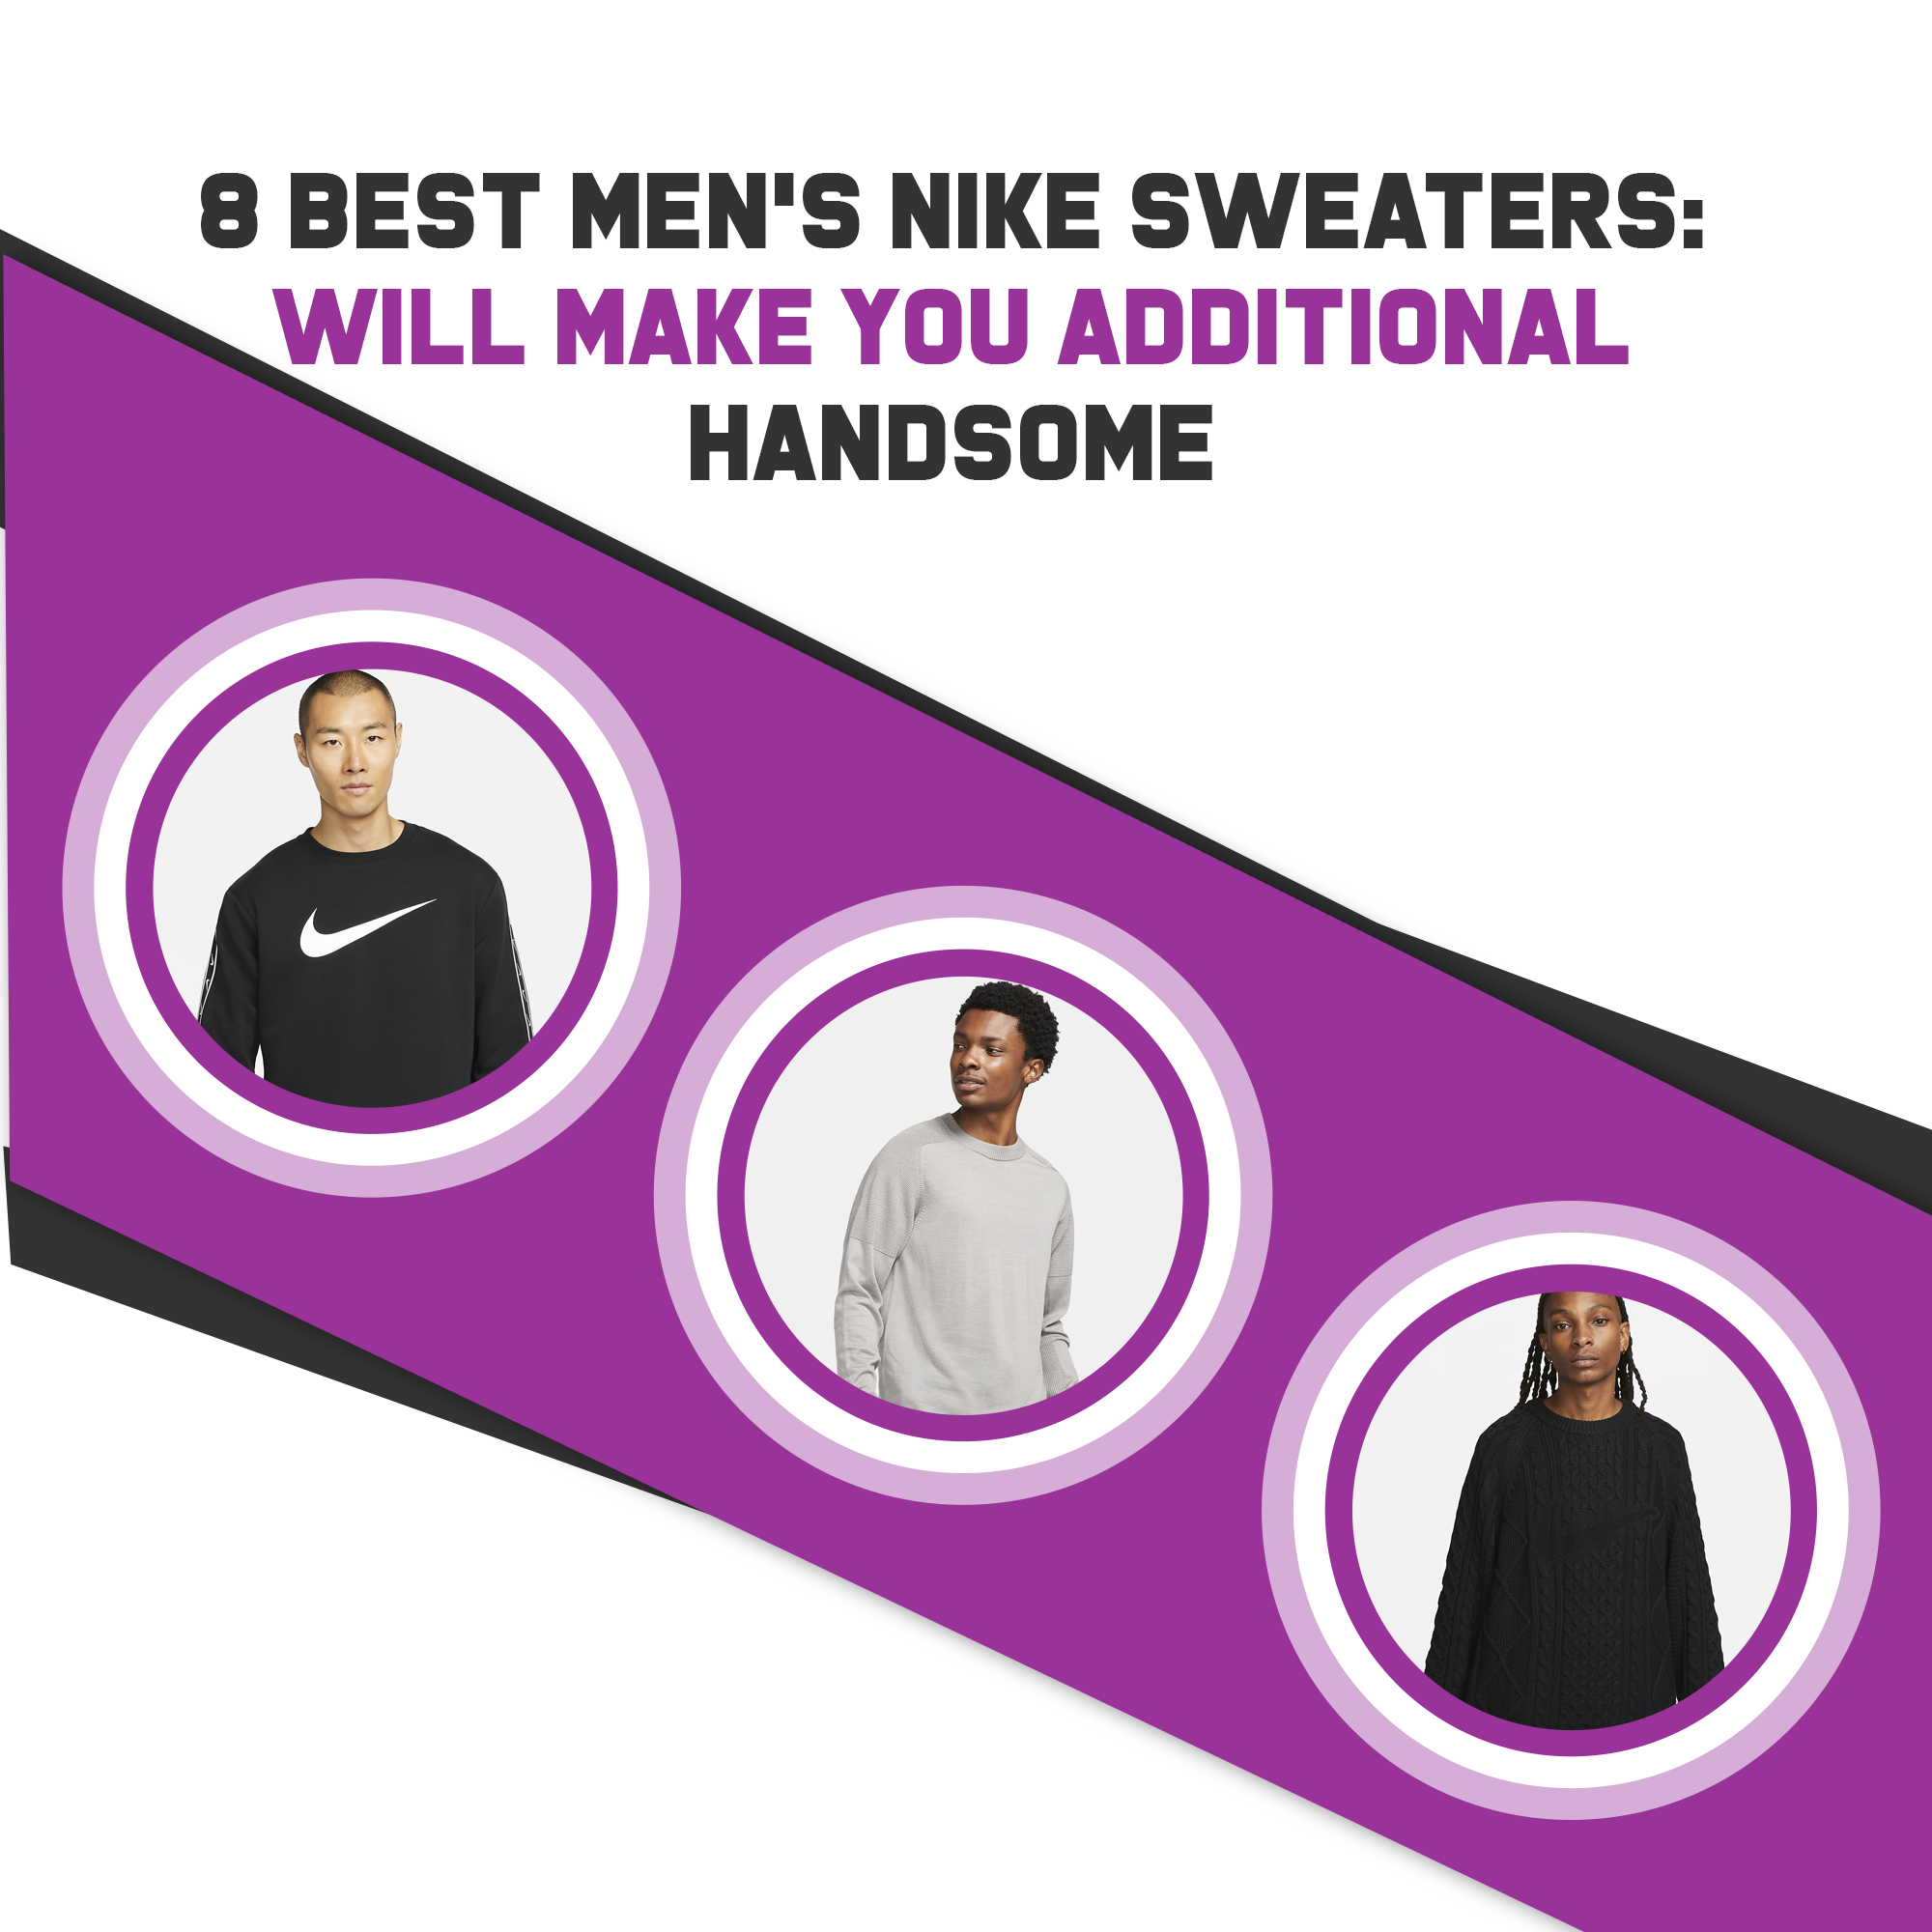 8 Best Men’s Nike Sweaters: Will Make You Additional Handsome